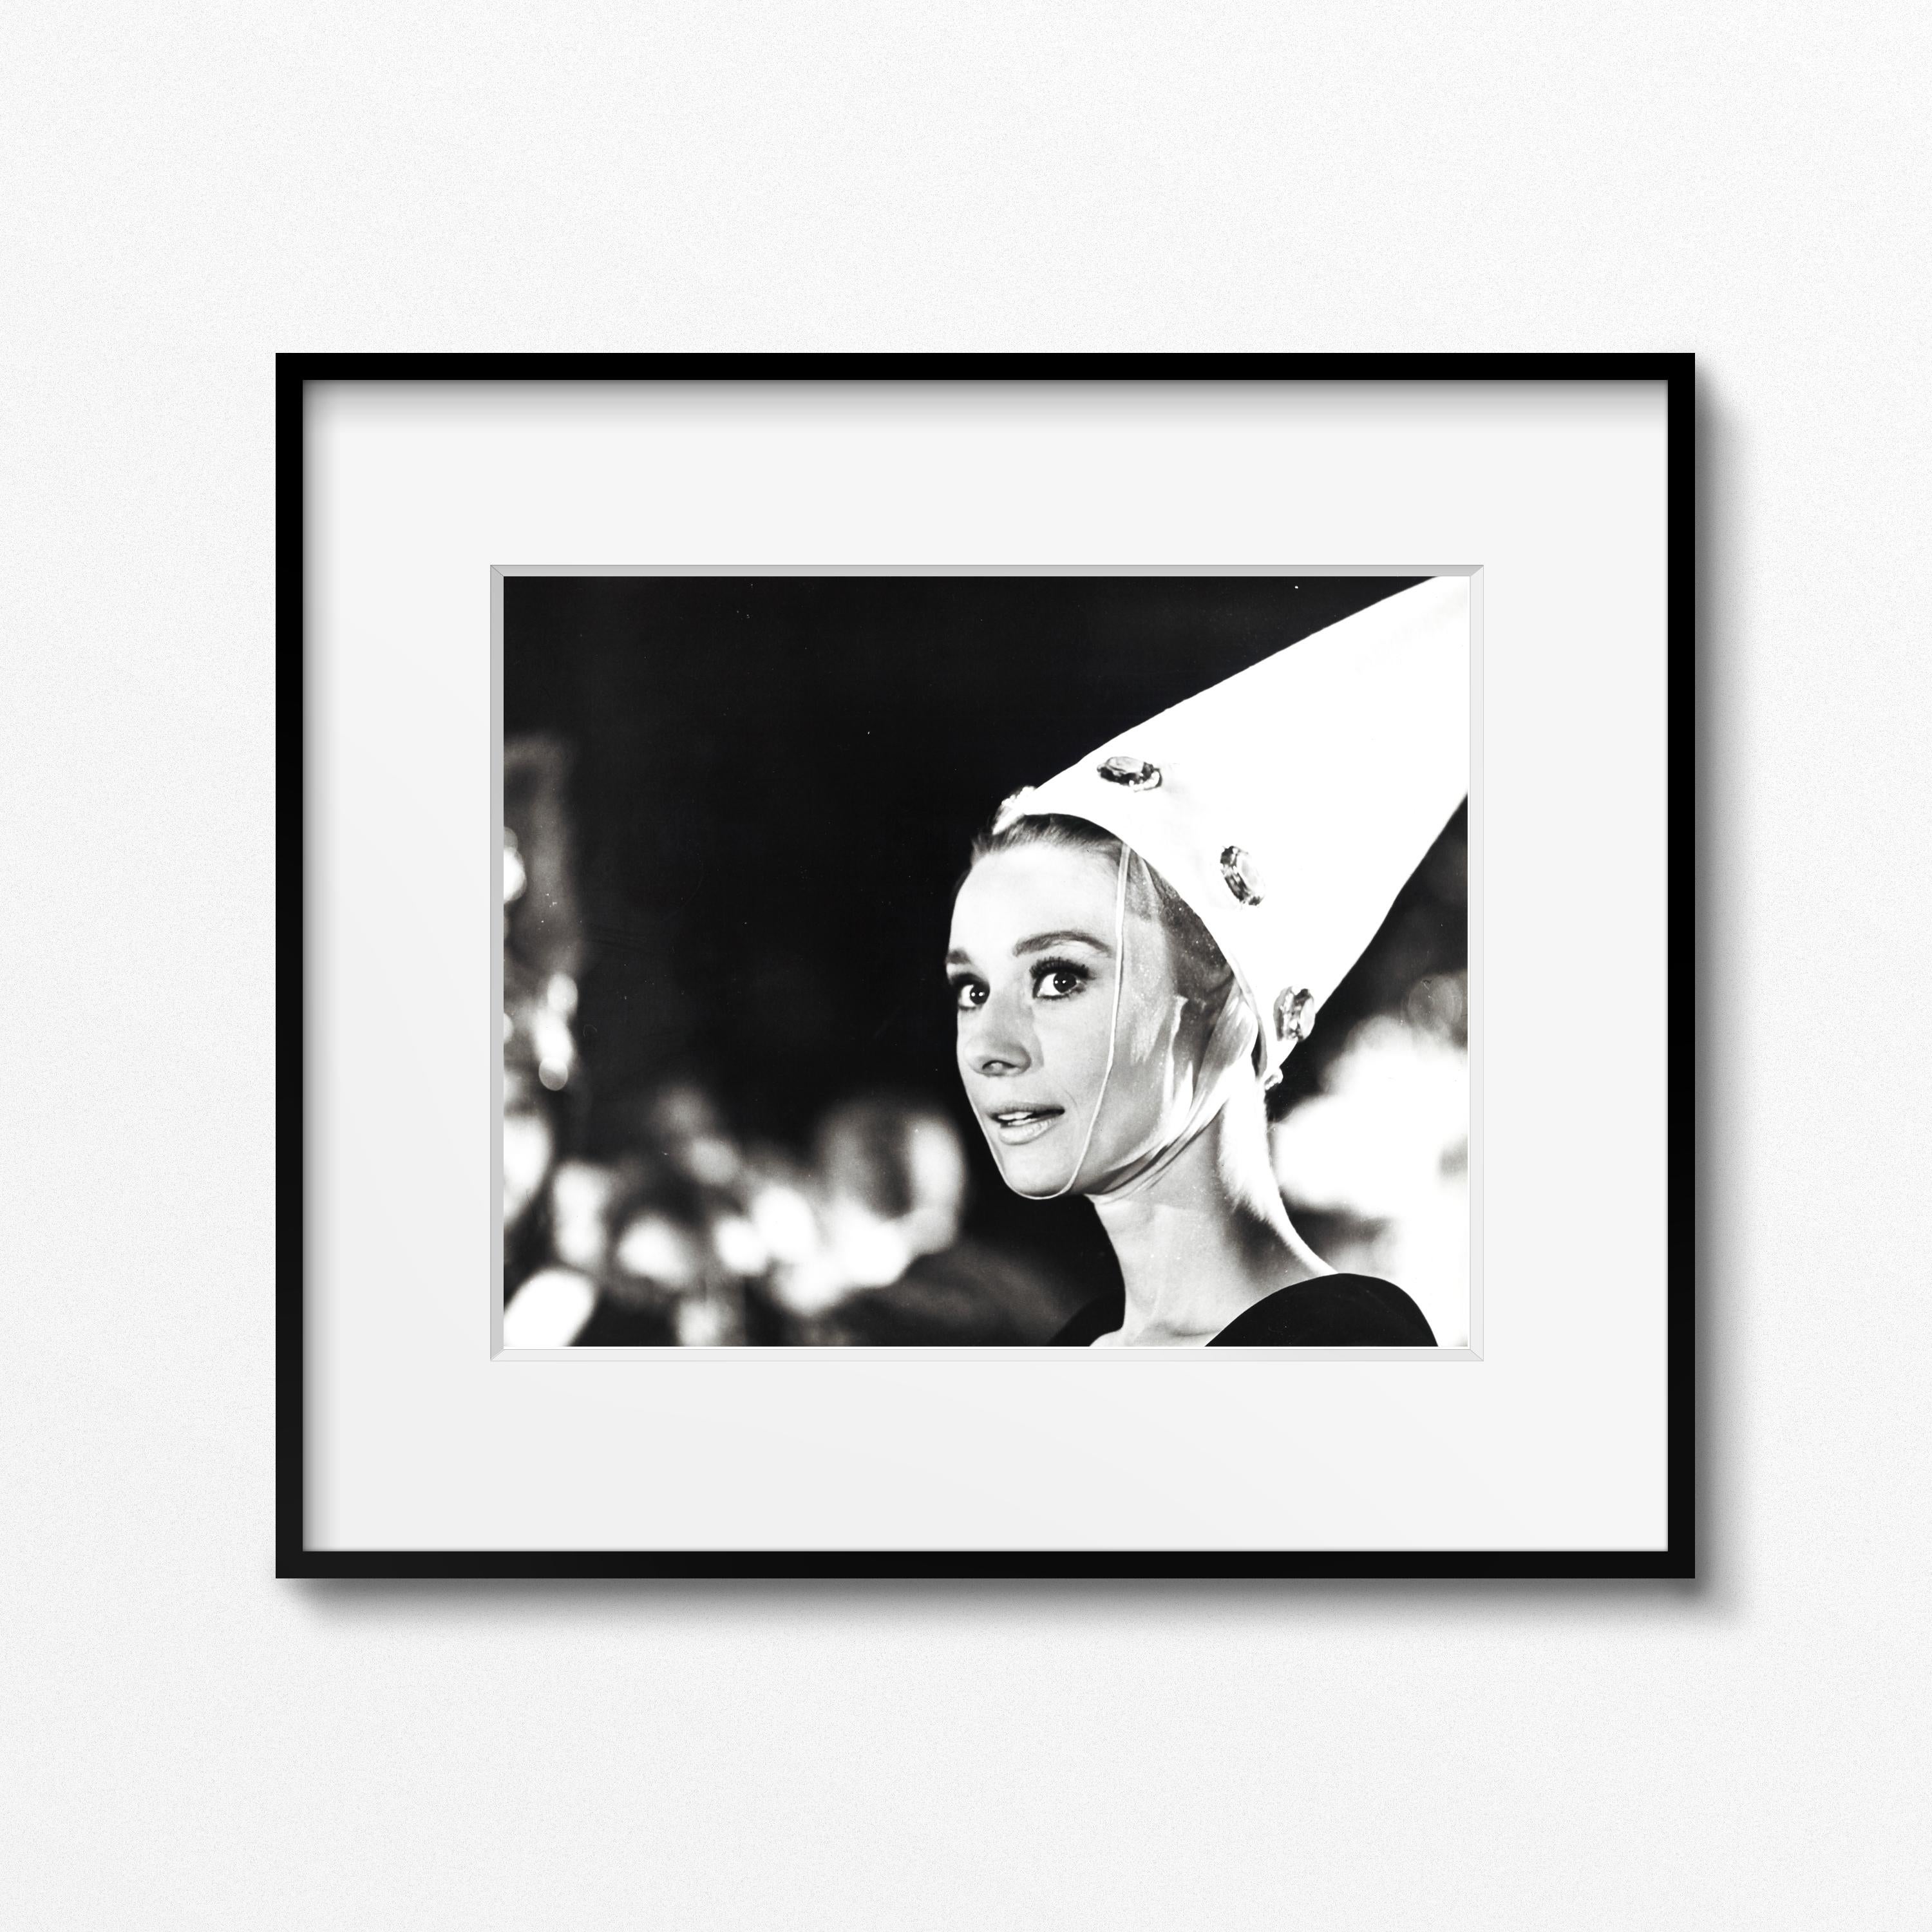 From the Personal collection of Audrey Hepburn, Christie's, September 2017
Audrey Hepburn on the set of 'Paris When it Sizzles,' Paris, 1962 by Vincent Rossell
Vintage gelatin silver print
Photographer's credit stamp, Audrey Hepburn collection